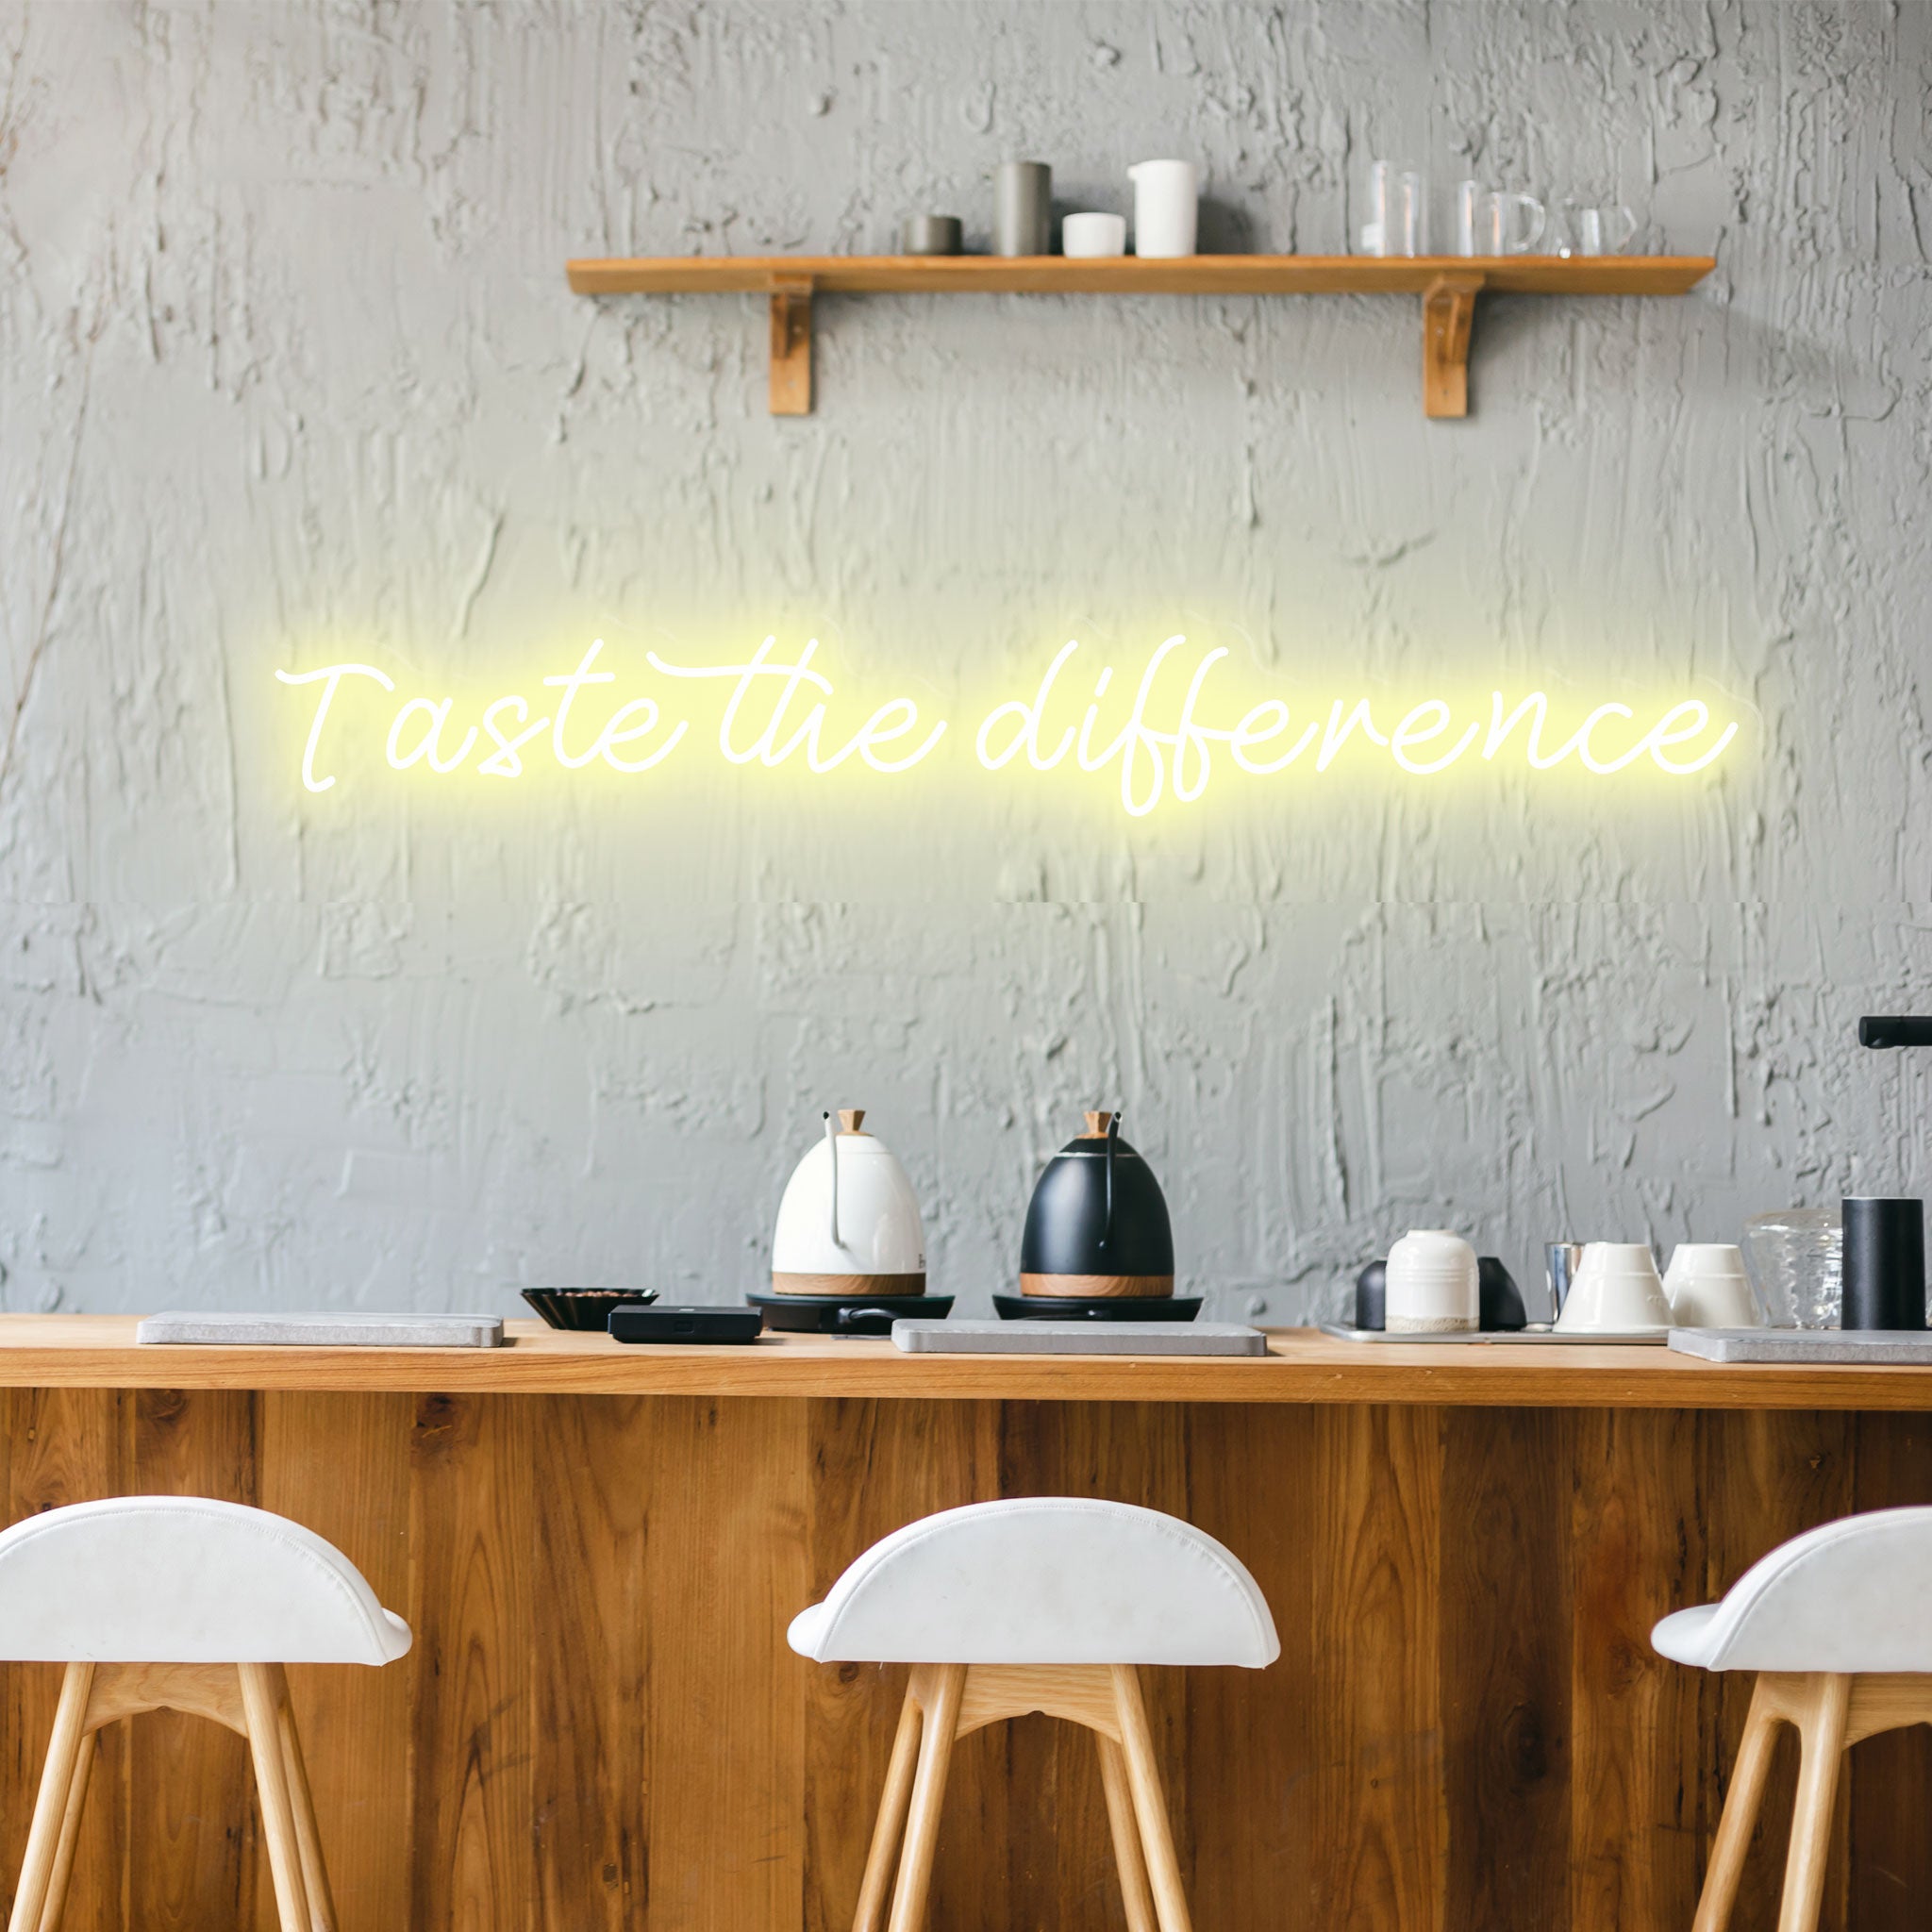 Taste The Difference - Neon Sign - Restaurant Venue